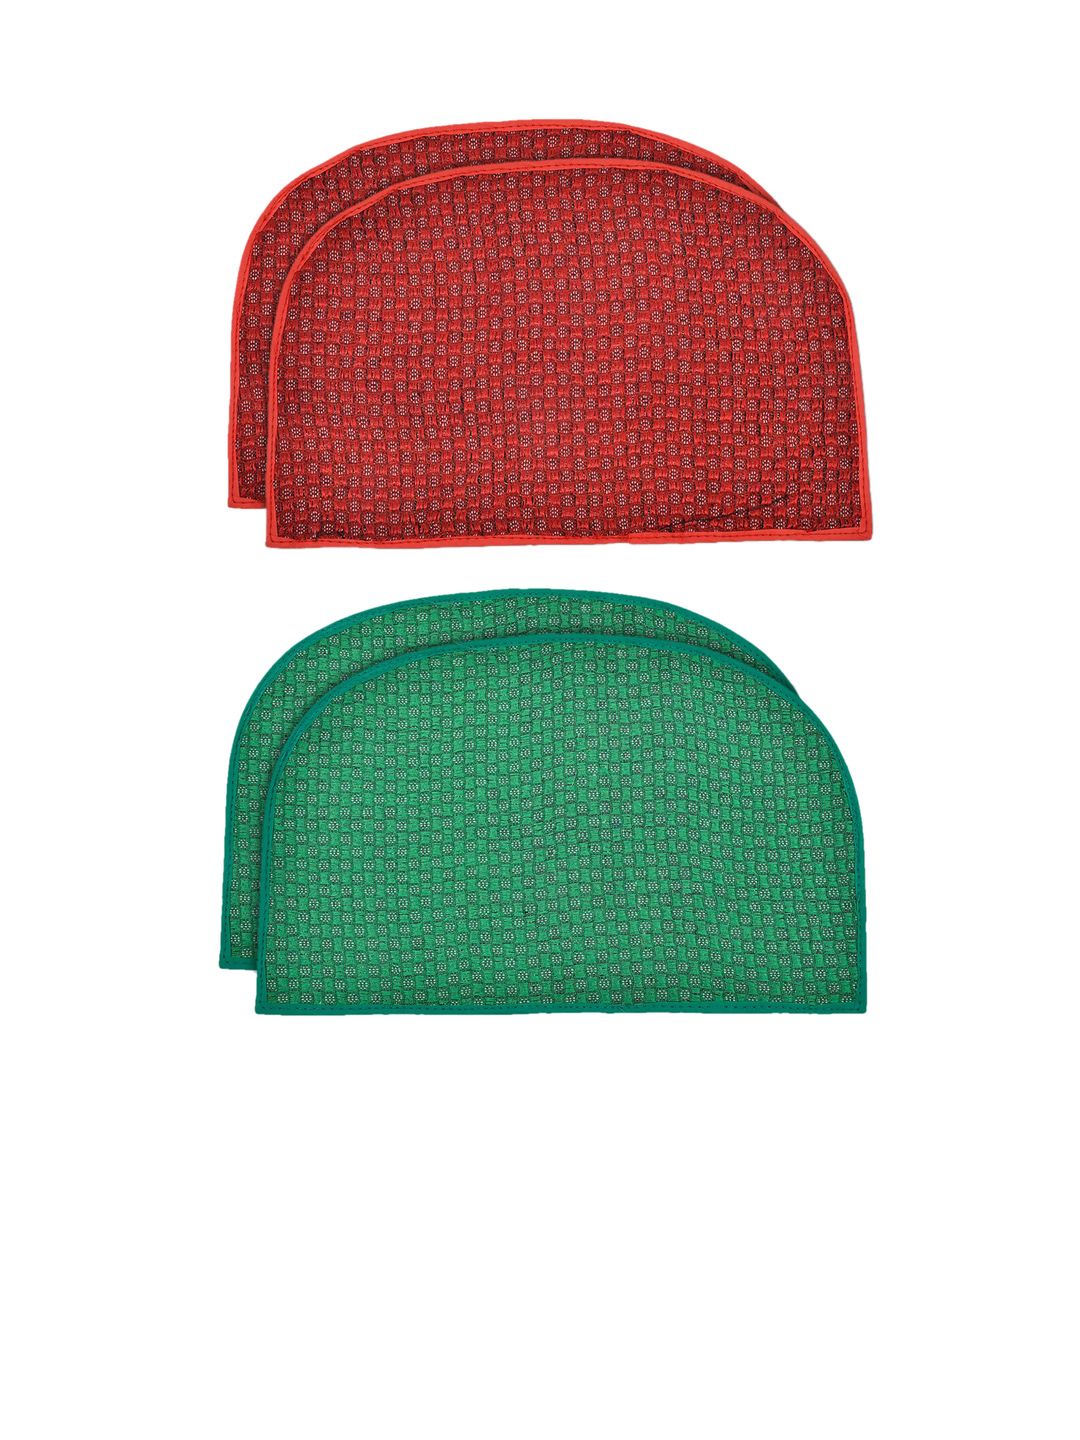 Kuber Industries Pack of 4 Red & Green Anti Skid Rubber Door Mat Price in India